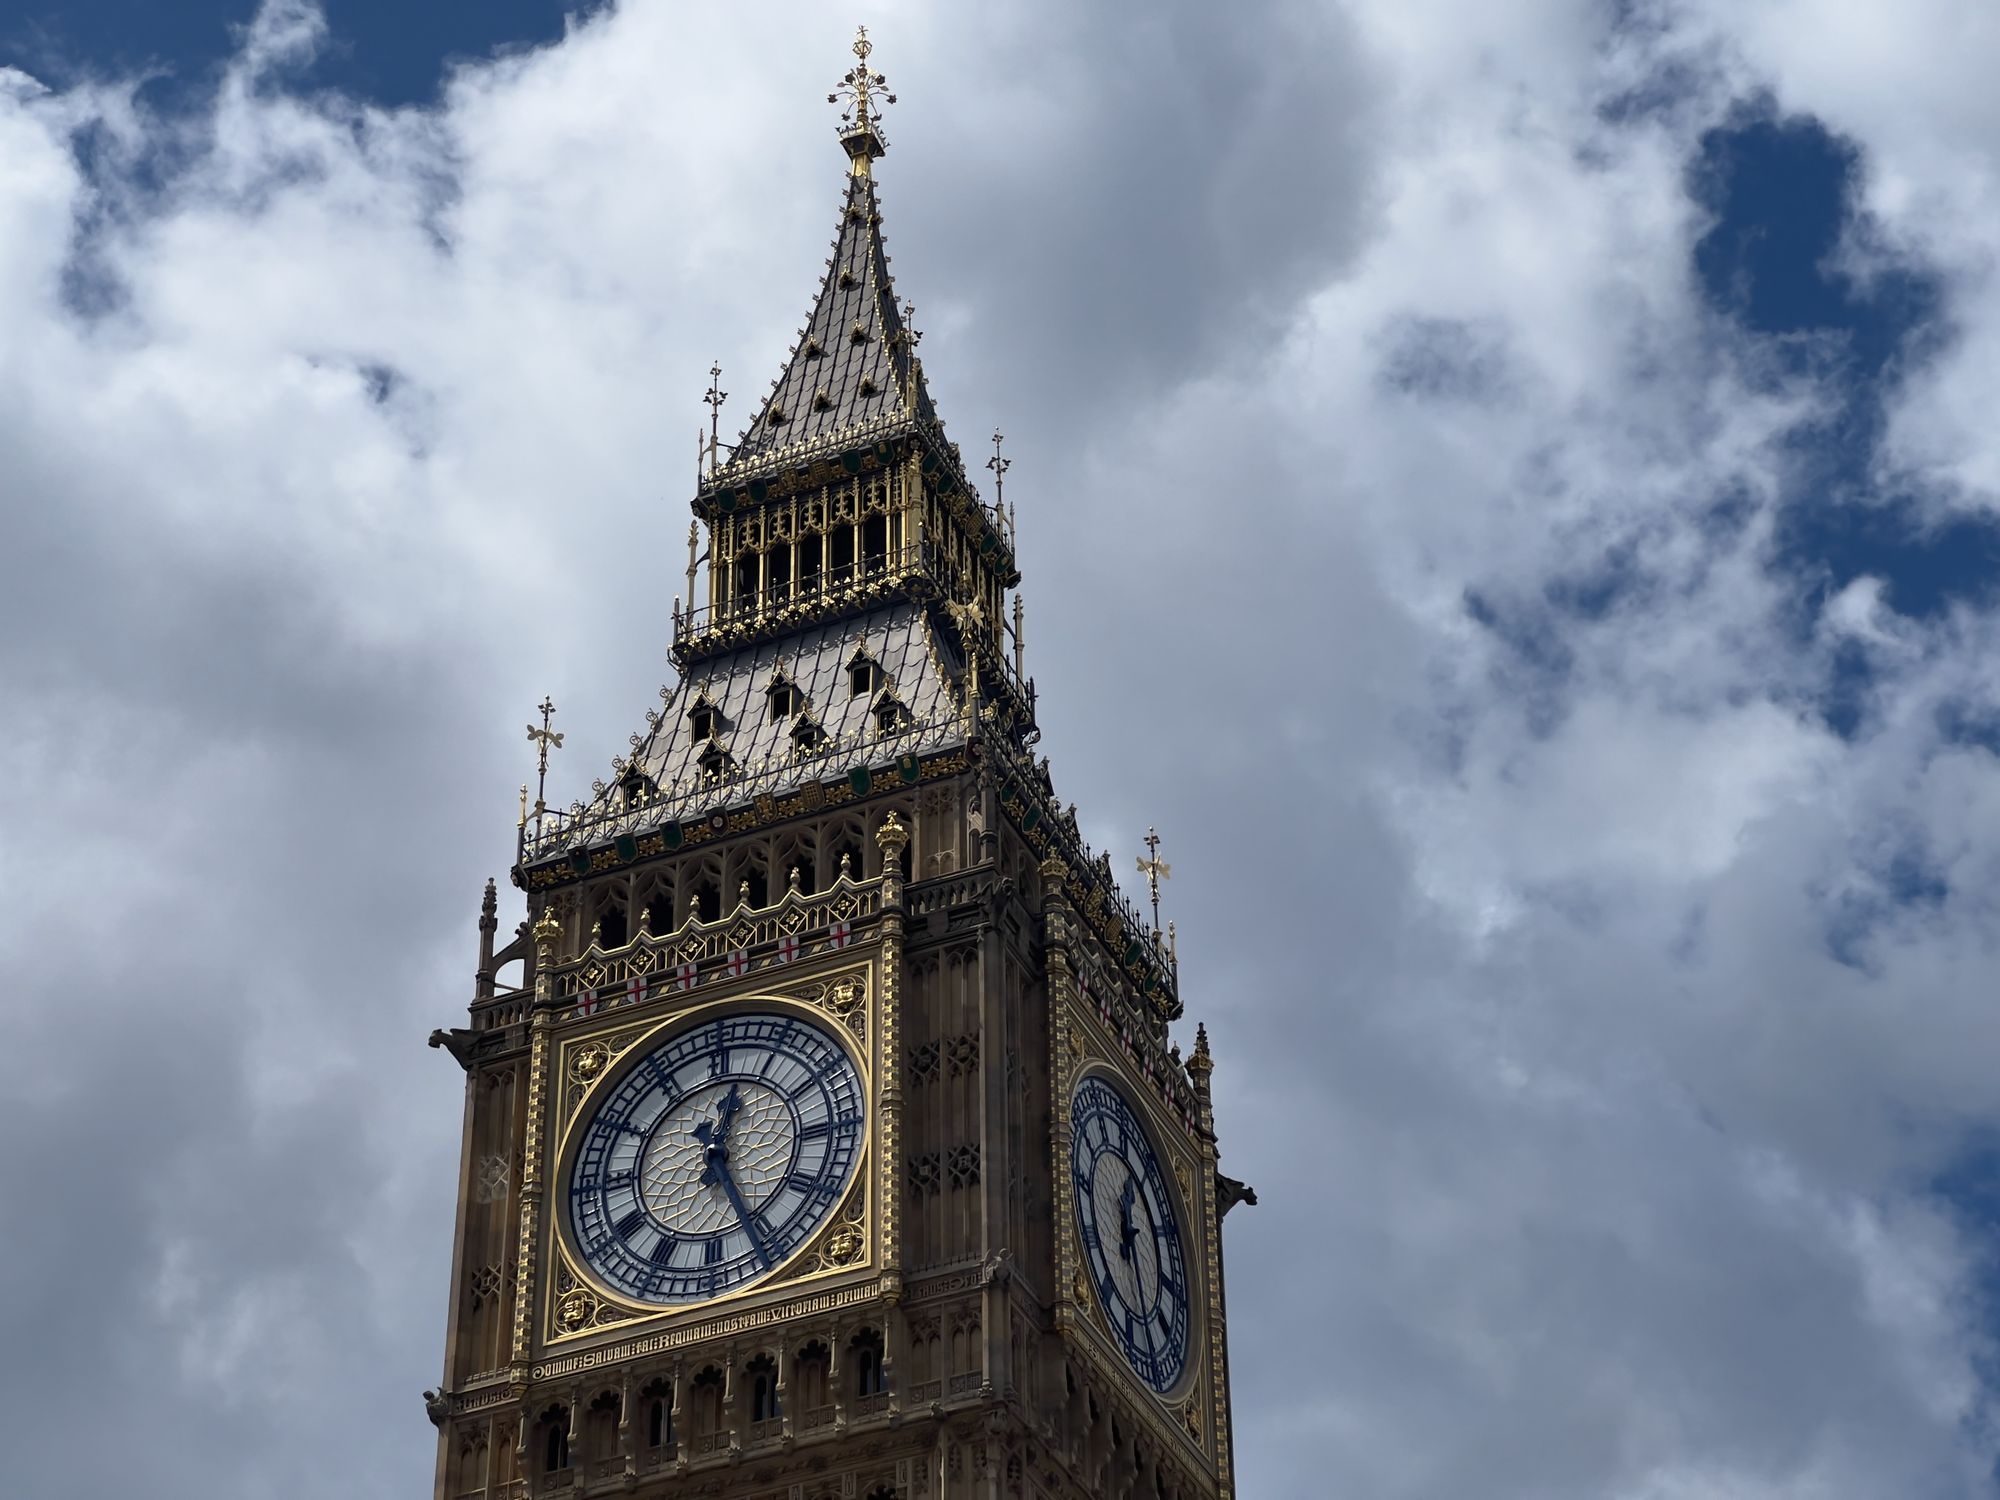 The top of the Palace of Westminster clock tower (Big Ben), in gilded gold and blue, against a partly cloudy sky.